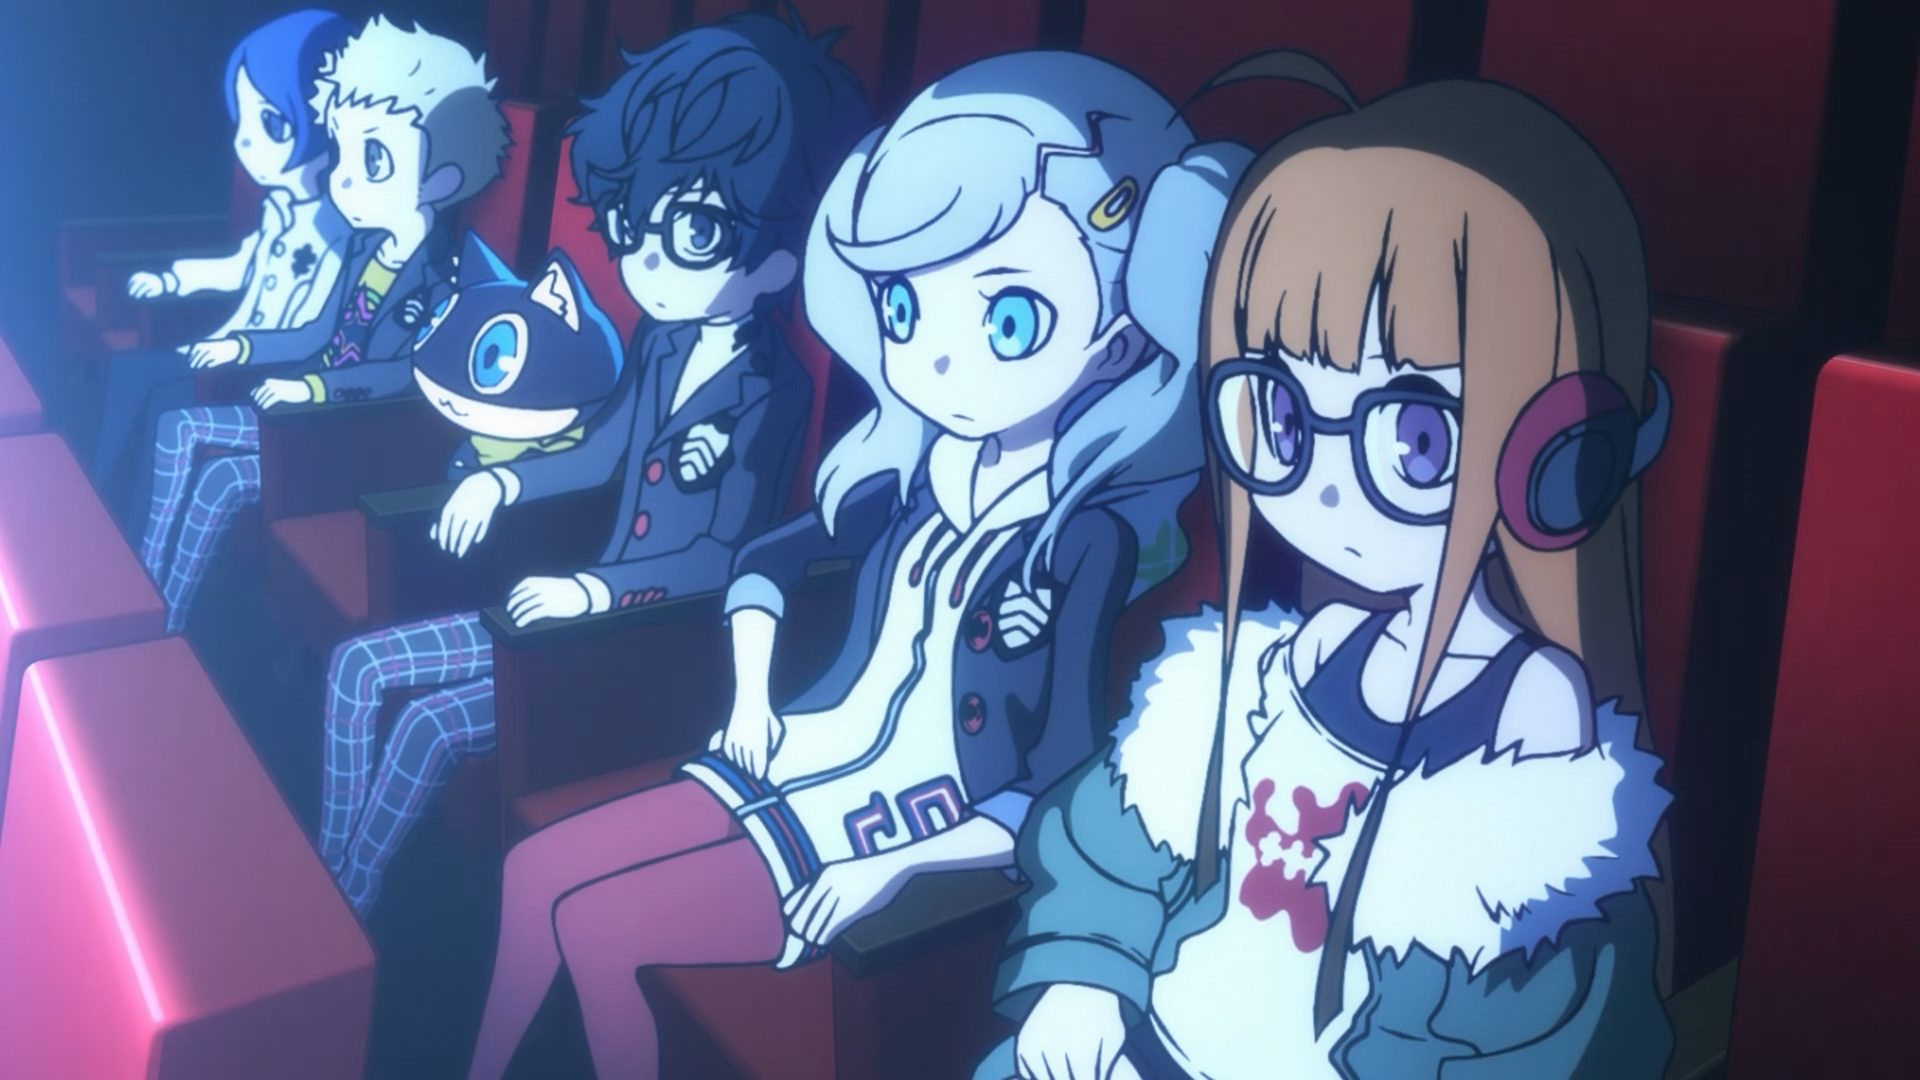 Persona Q2: New Cinema Labyrinth hits the 3DS this June